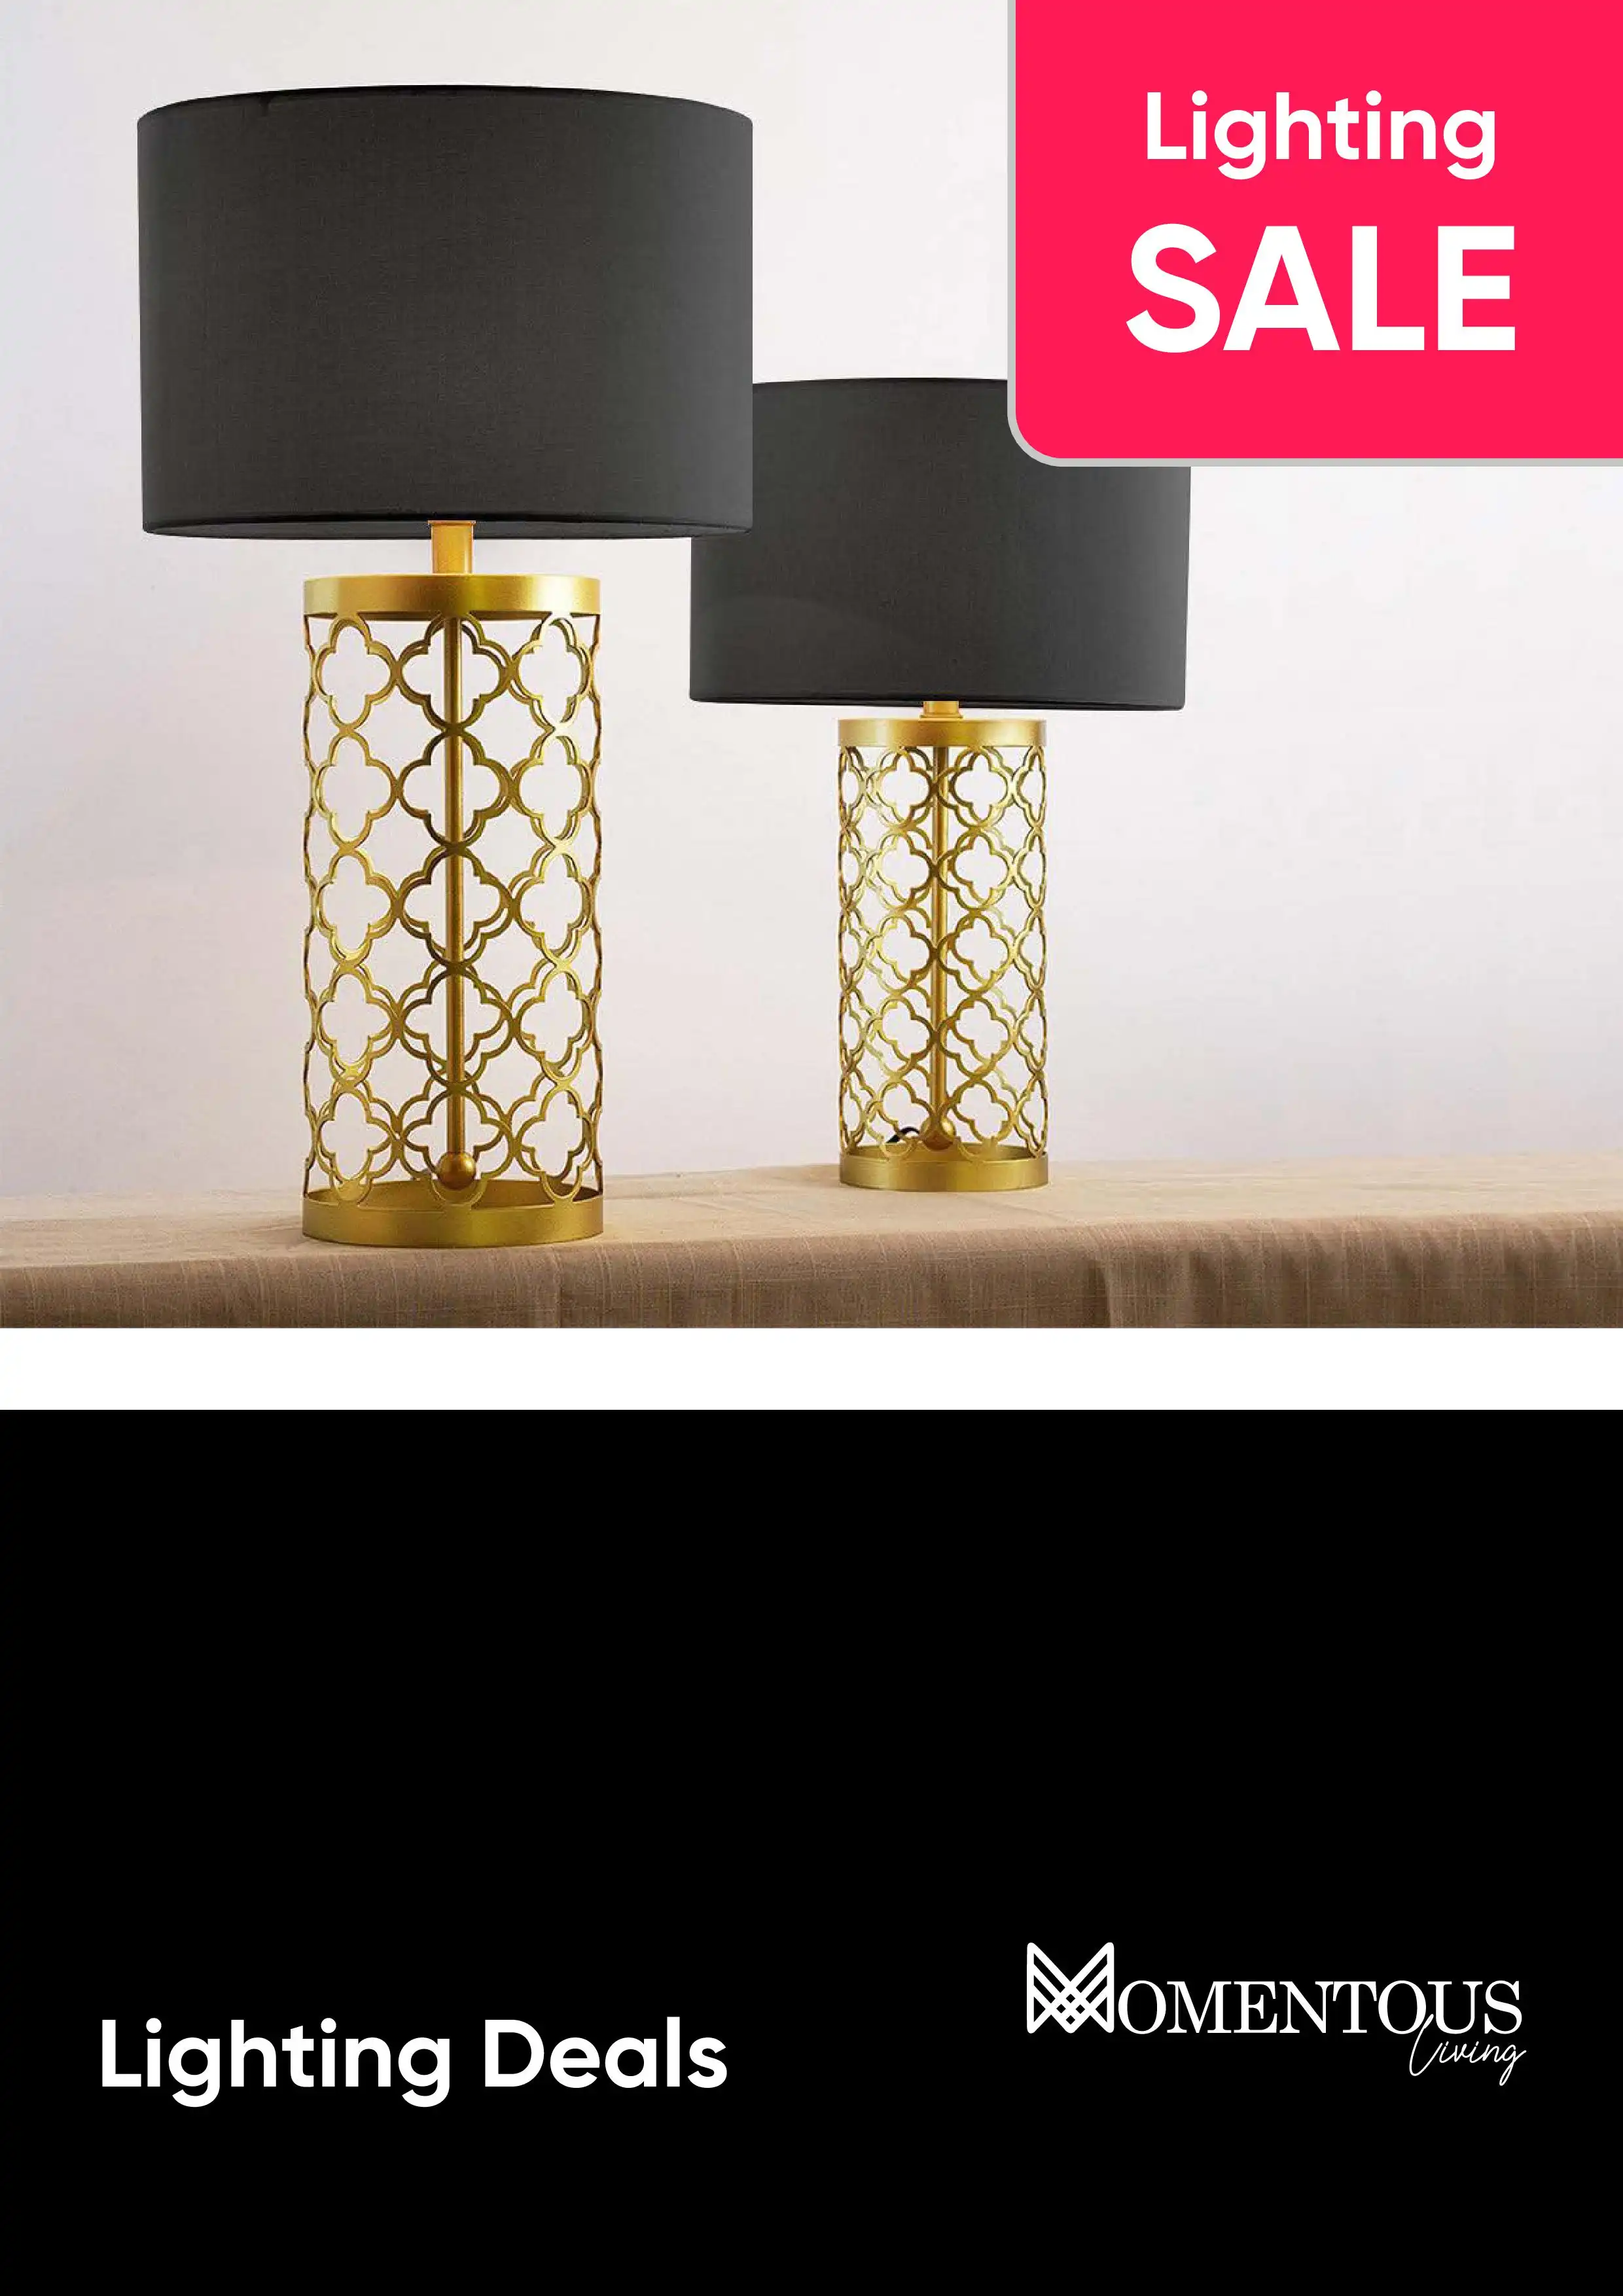 Lighting Sale - Table Lamps, Floor Lamps, Pendant Lamps and More